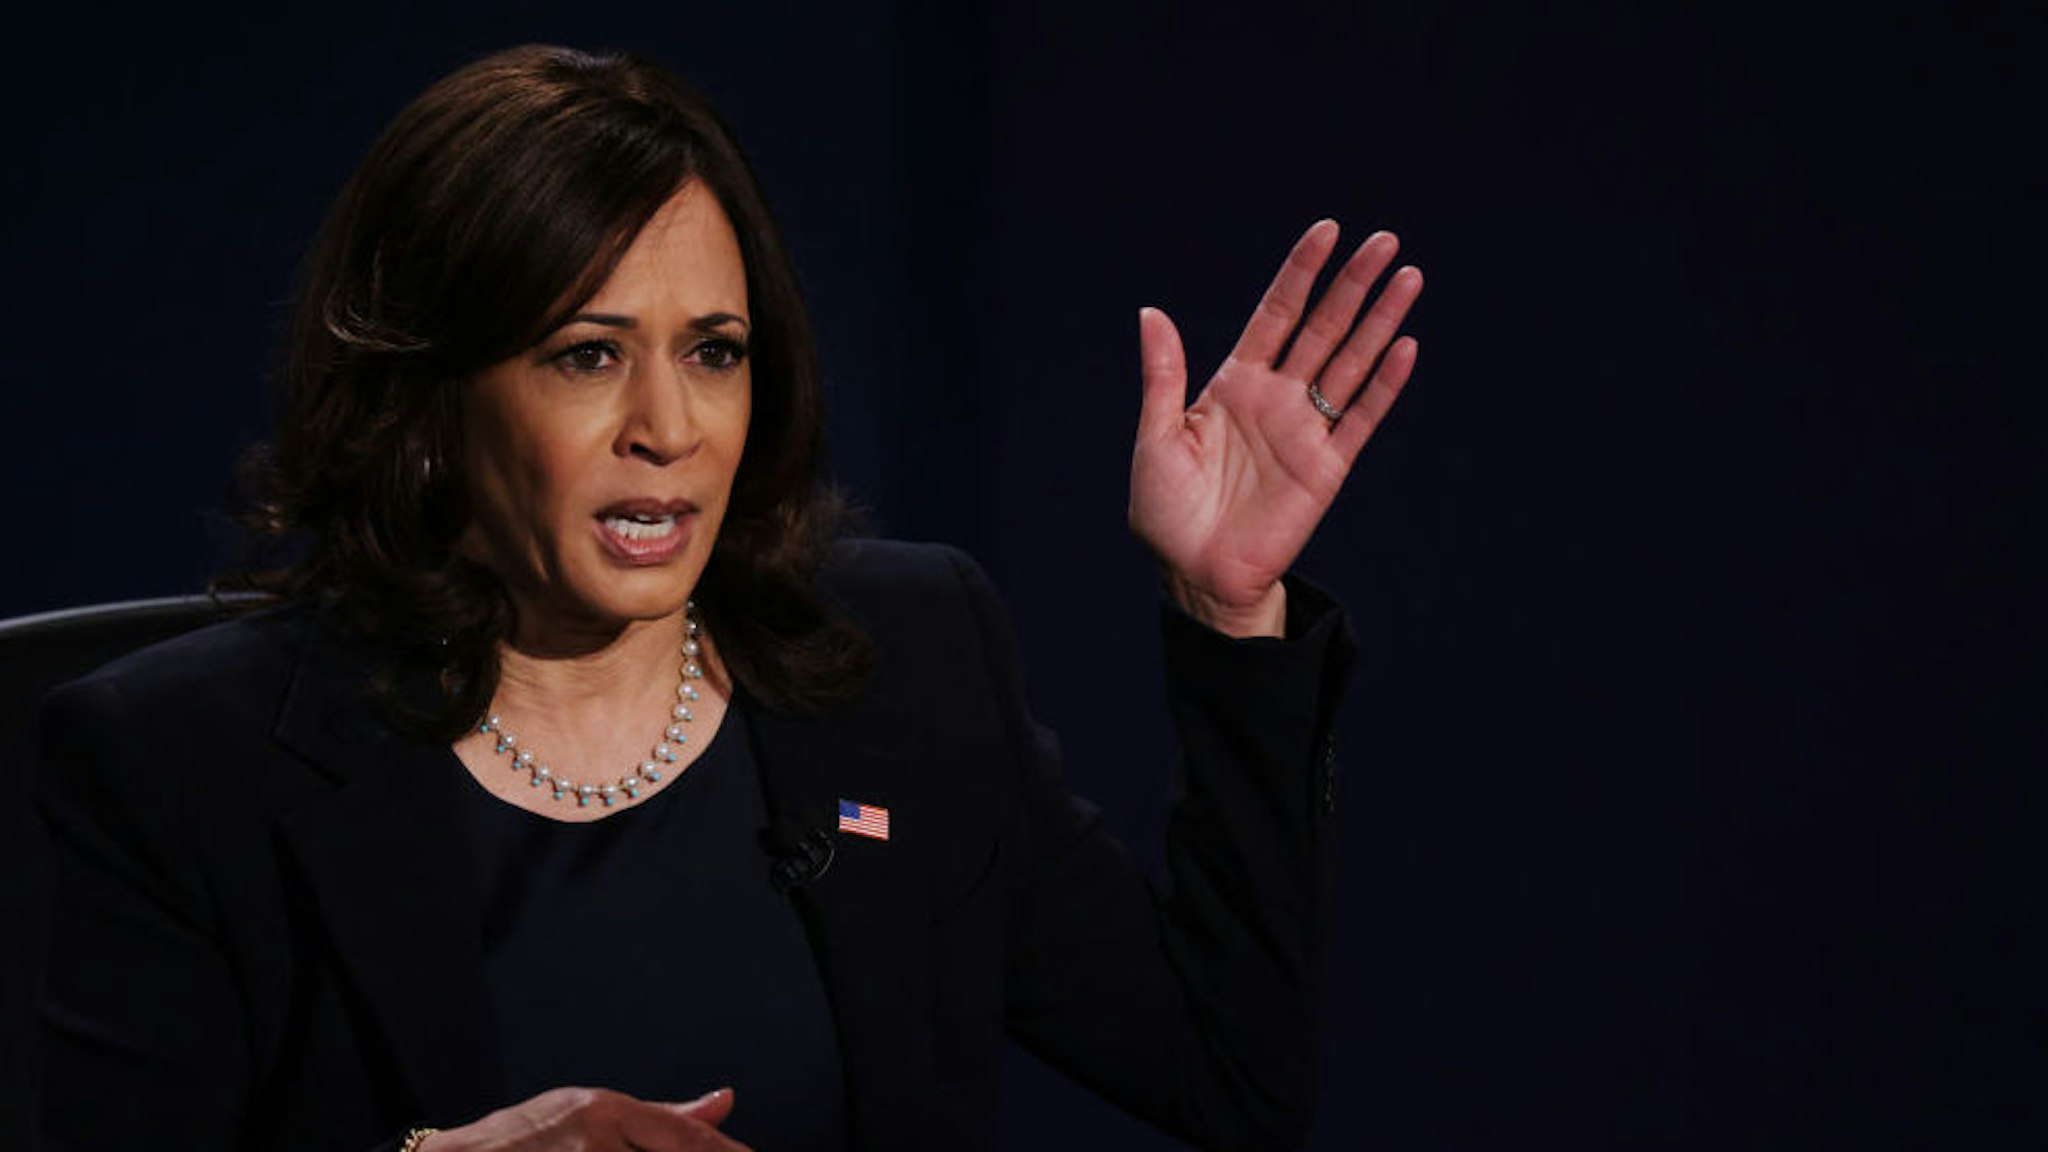 SALT LAKE CITY, UTAH - OCTOBER 07: Democratic vice presidential nominee Sen. Kamala Harris (D-CA) participates in the vice presidential debate against U.S. Vice President Mike Pence at the University of Utah on October 7, 2020 in Salt Lake City, Utah. The vice presidential candidates only meet once to debate before the general election on November 3.